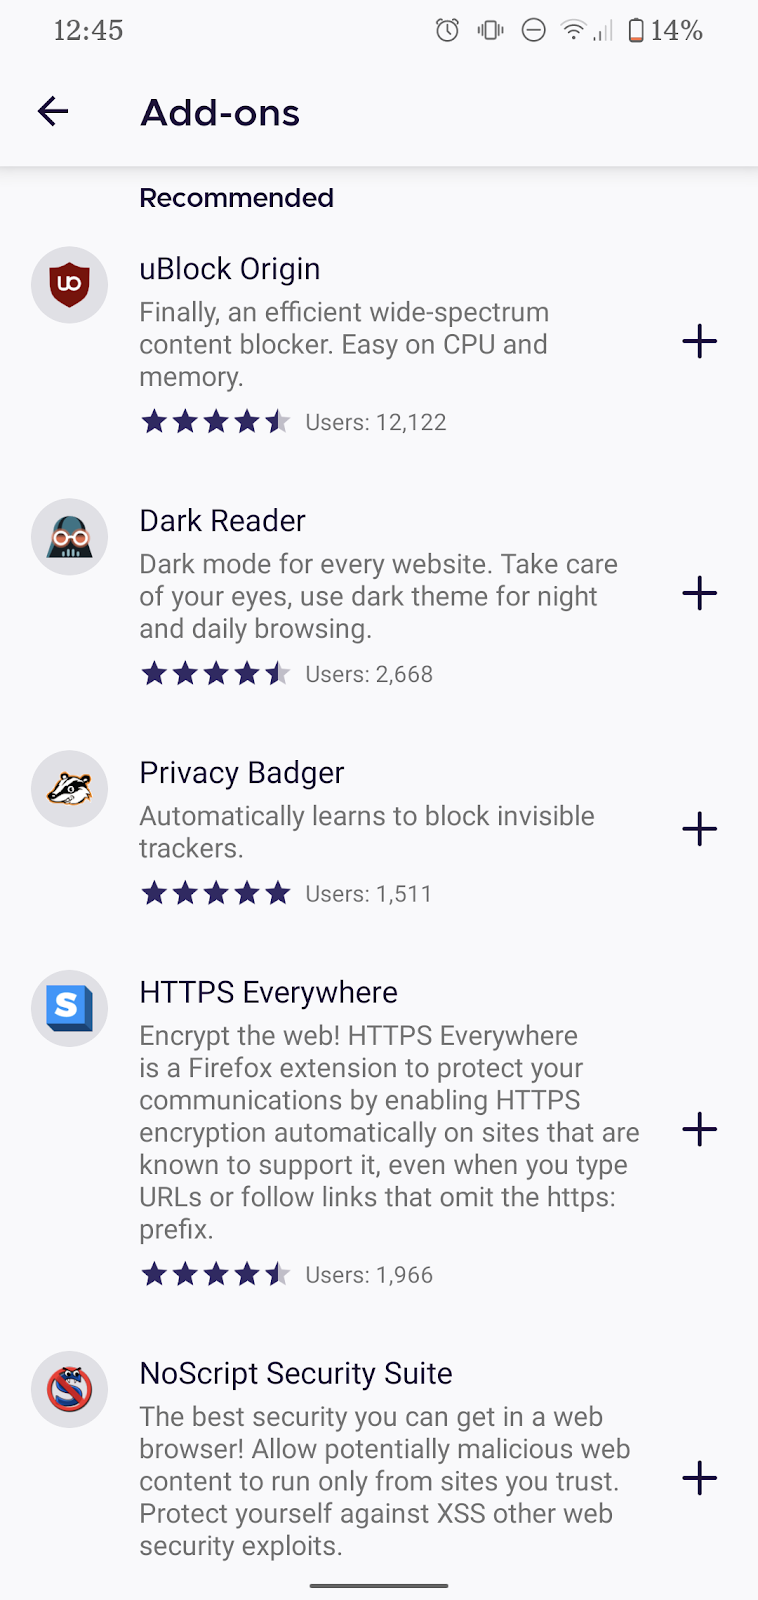 The overhauled Android browser comes with the top add-ons for enhanced privacy and user experience.